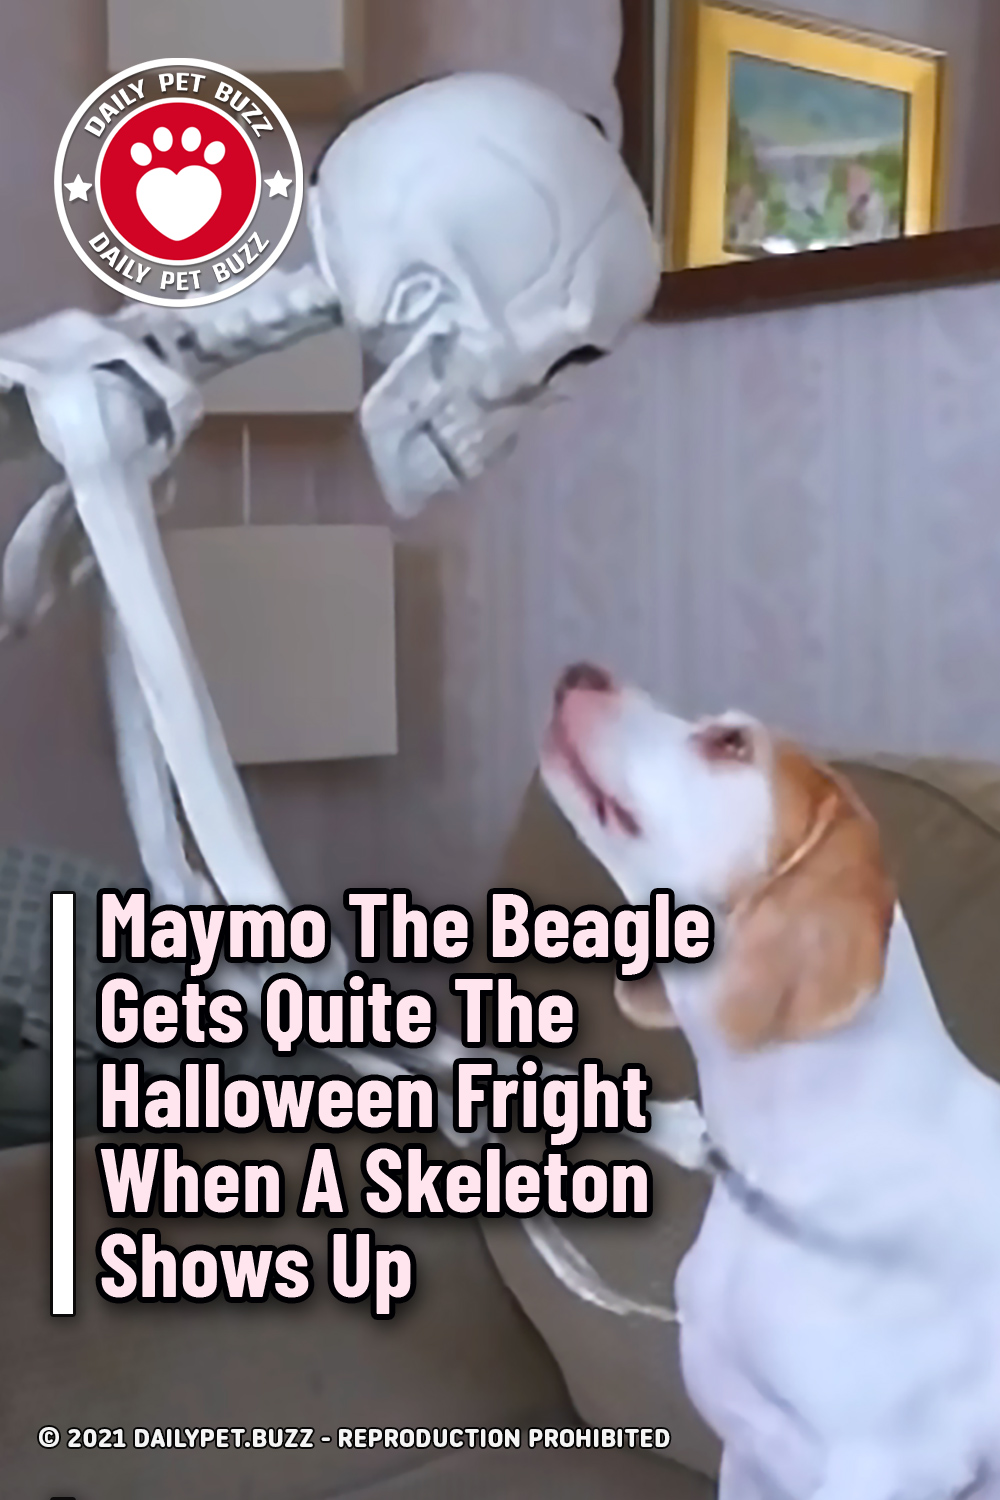 Maymo The Beagle Gets Quite The Halloween Fright When A Skeleton Shows Up